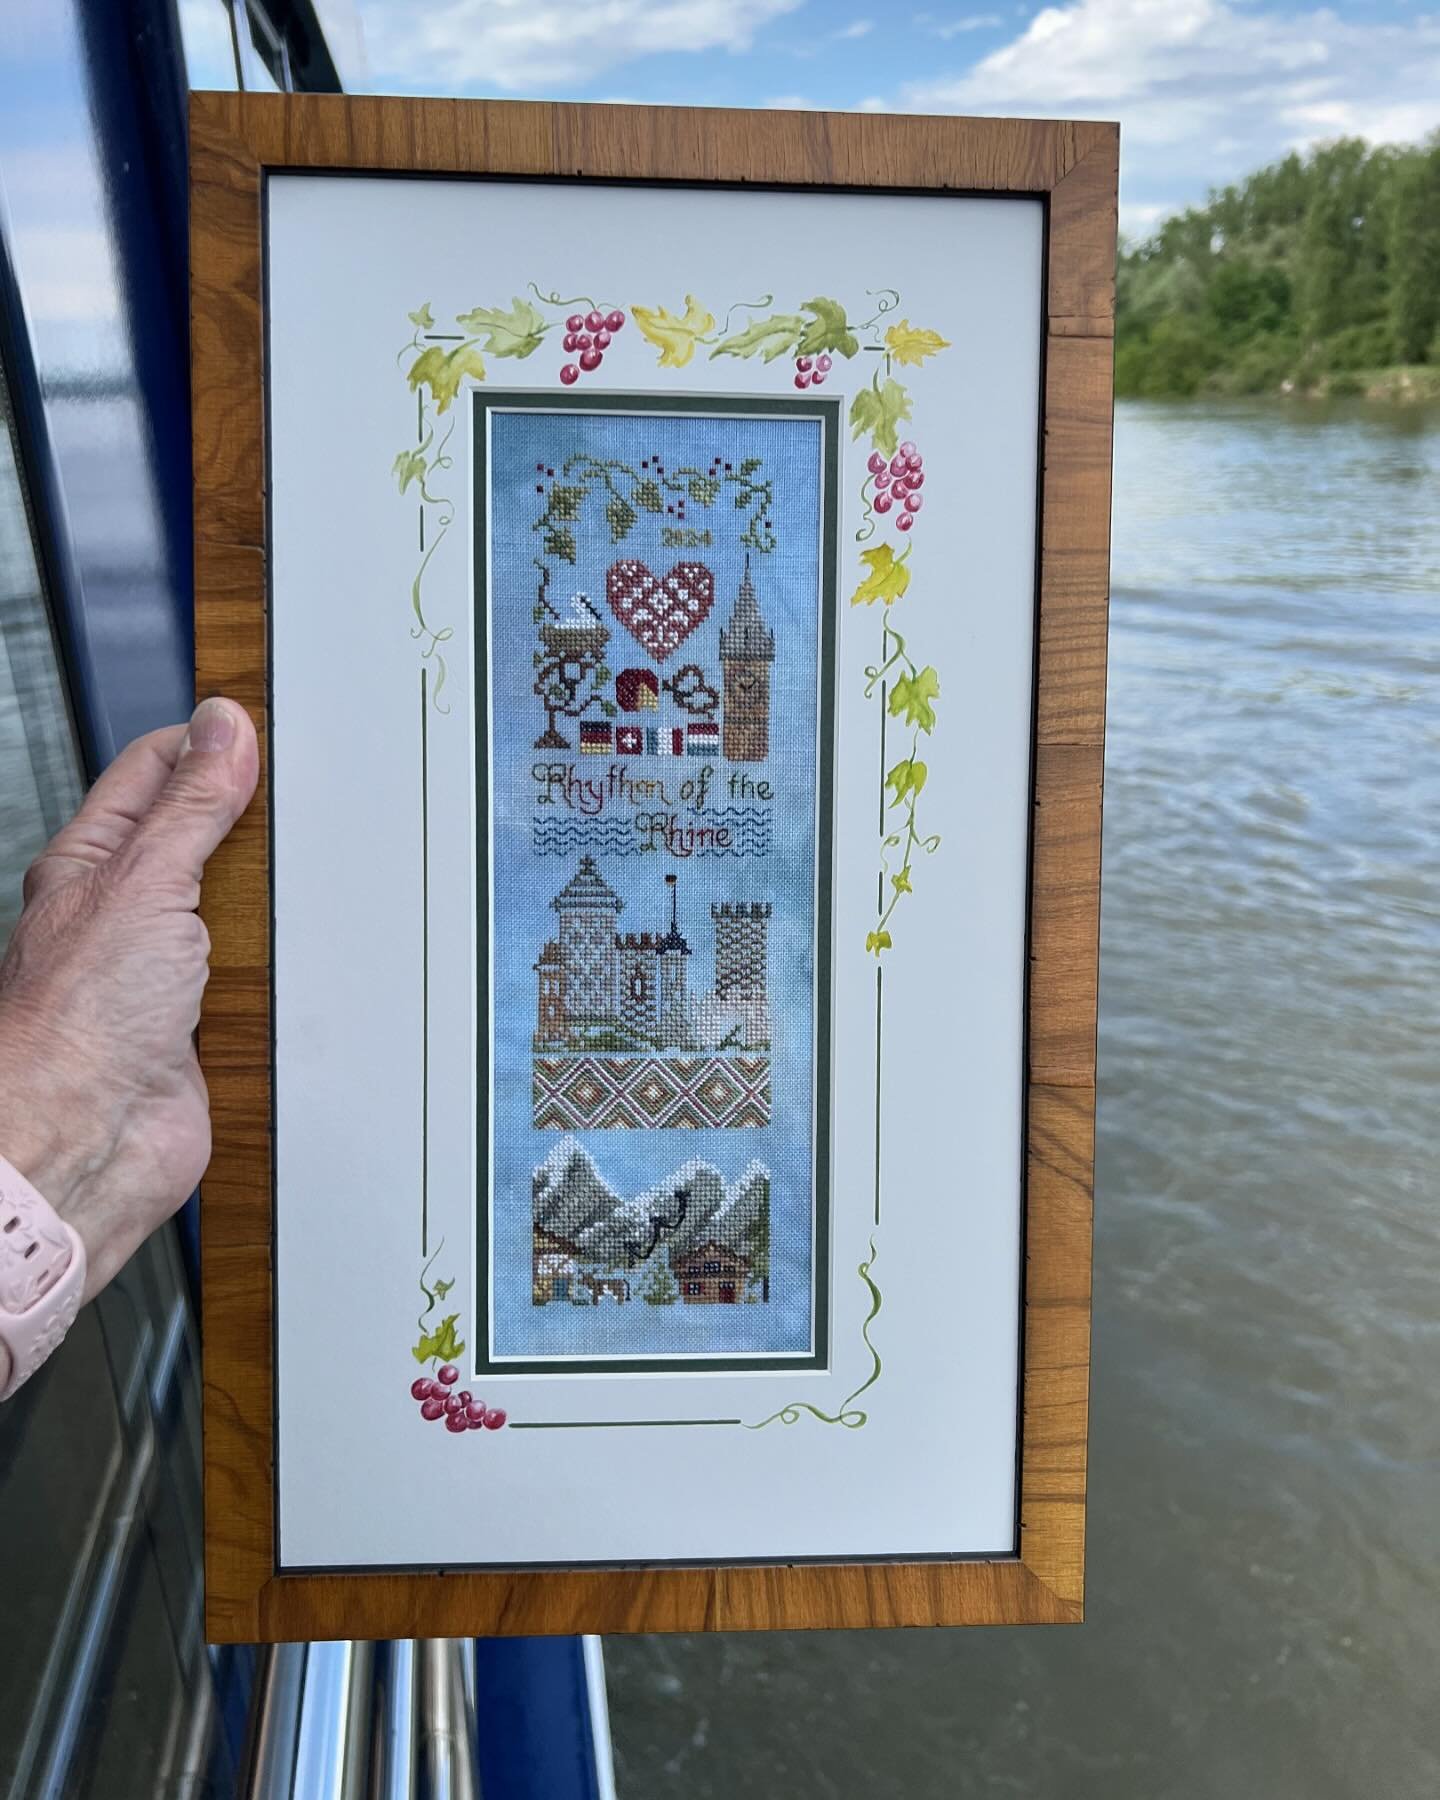 This is our piece for the trip, Rhythm of the Rhine, depicting all the places we&rsquo;ve been. I&rsquo;m amazed at how fast some stitchers are!!!!! Fabulous! #jeannettedouglasdesigns #jeannettedouglas #amawaterwayscruise #rhinerivercruise #jddtravel